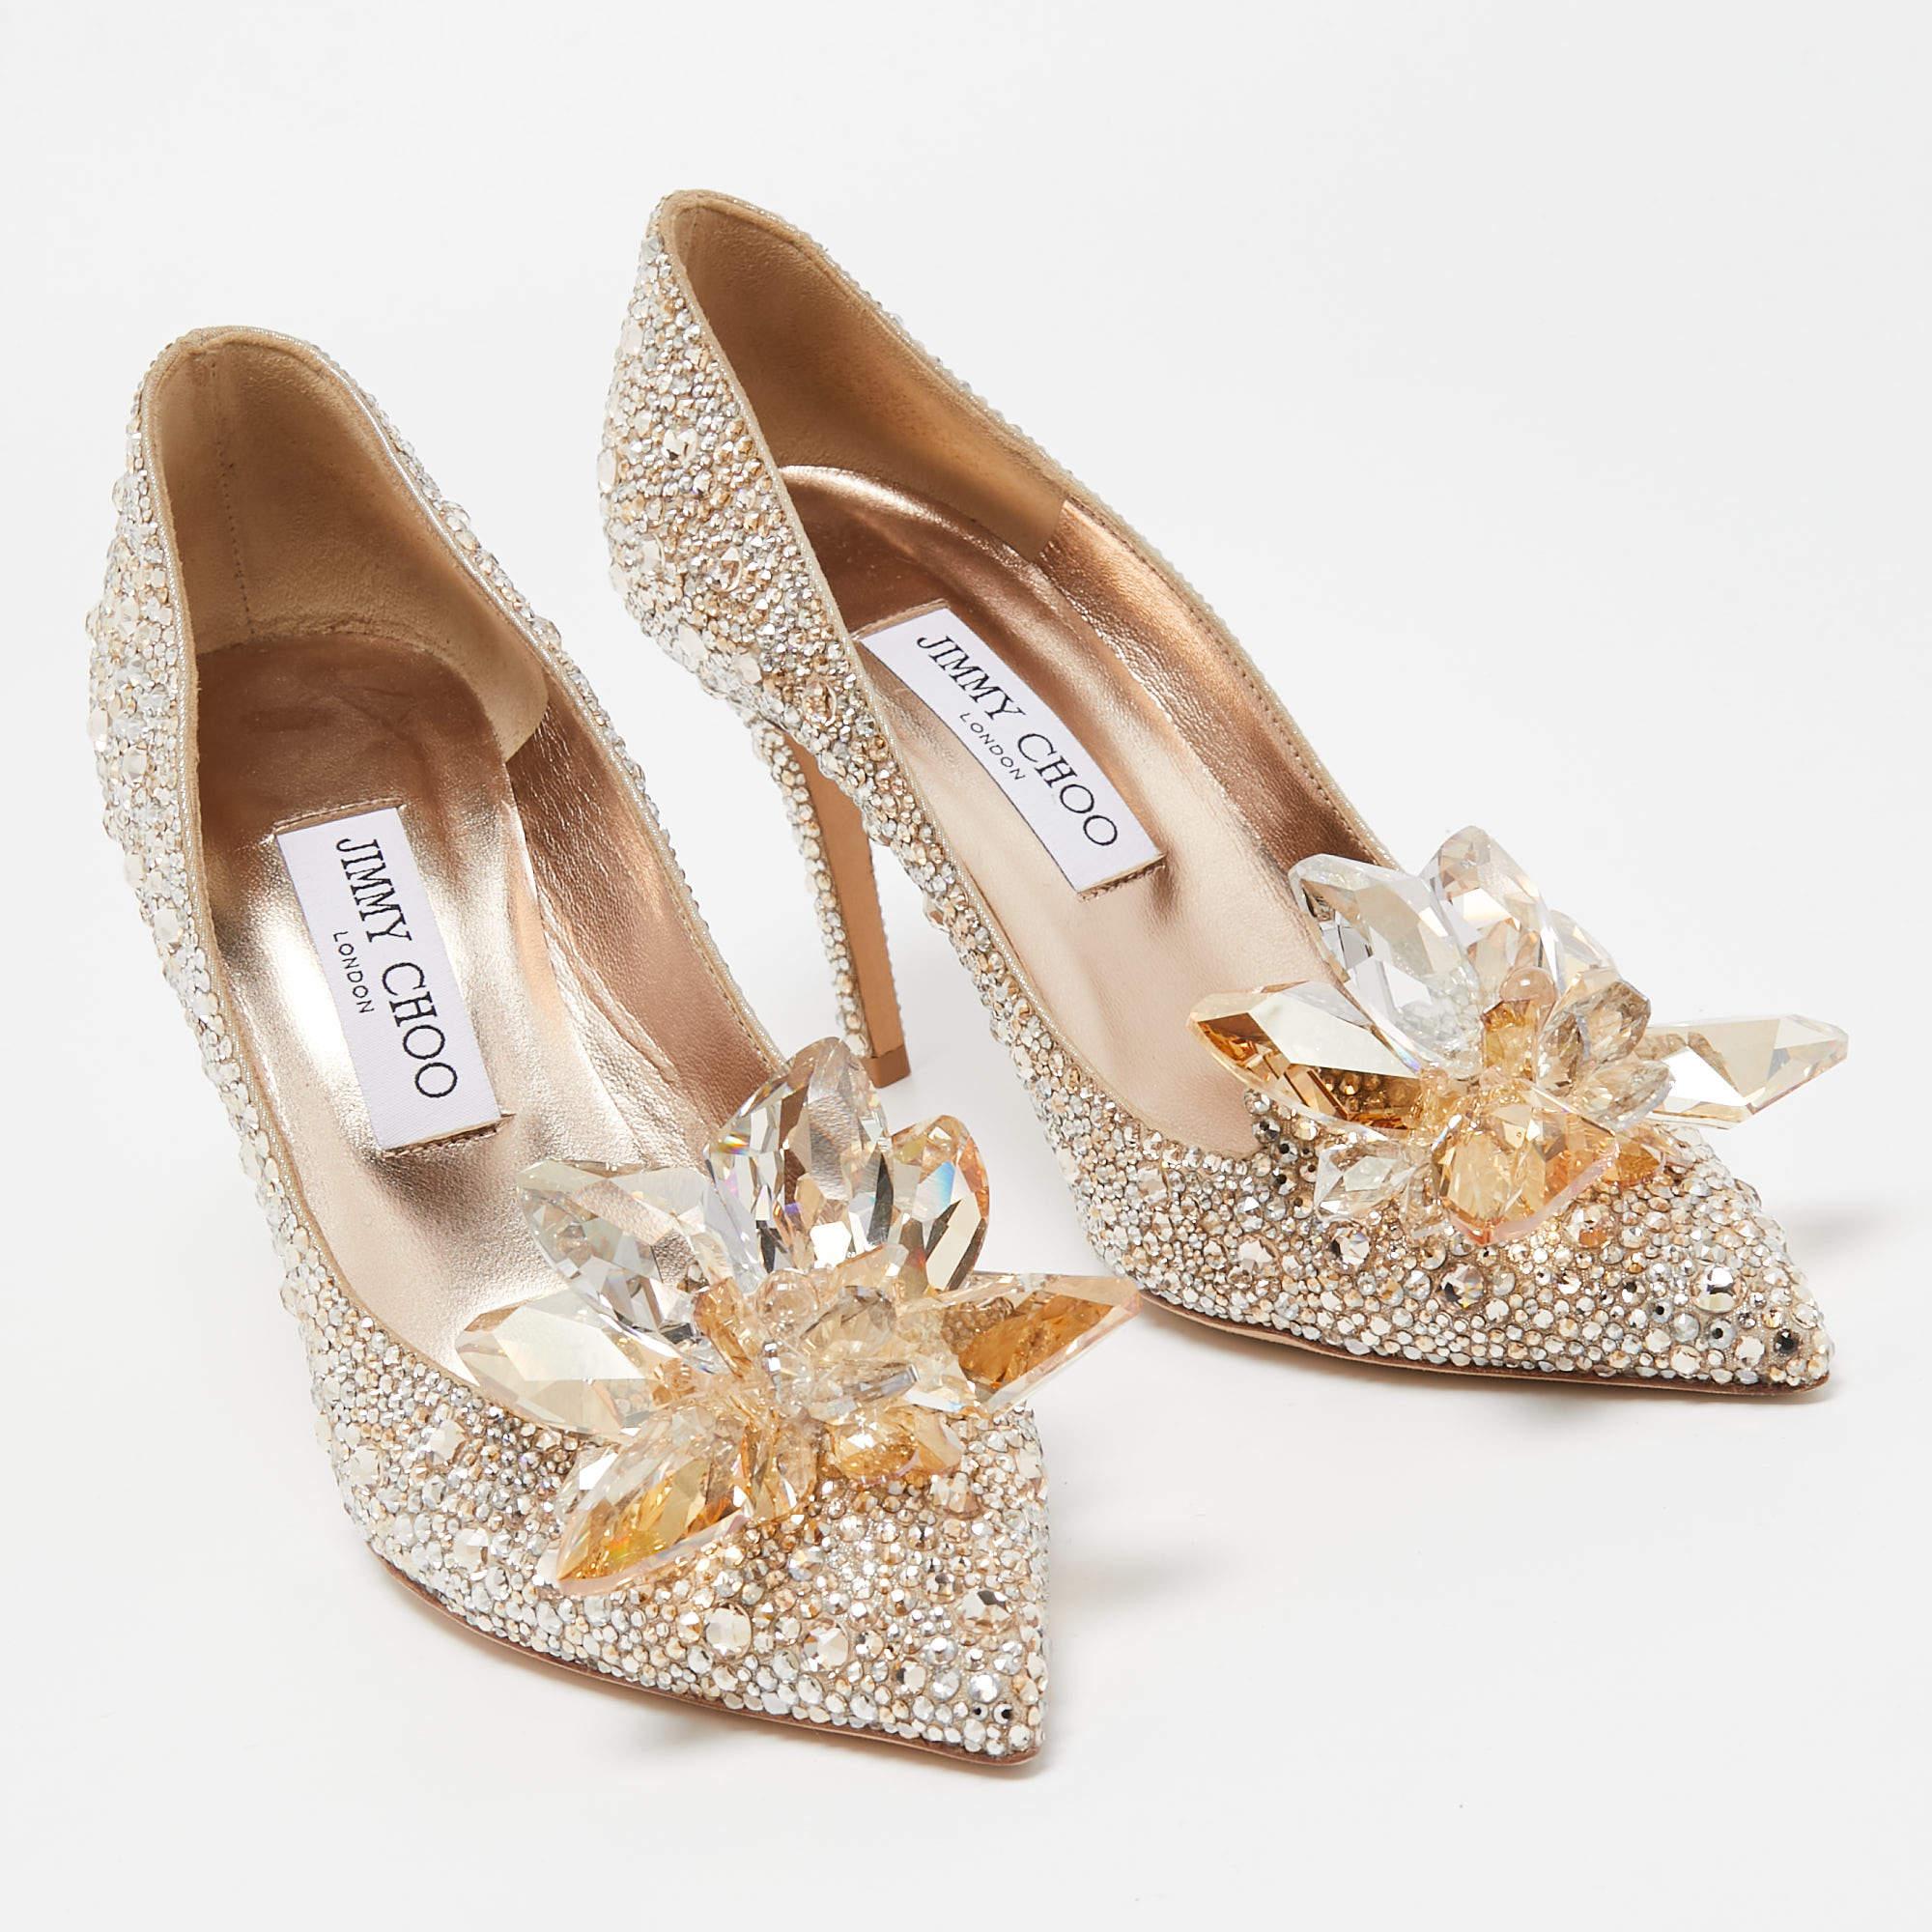 Jimmy Choo Gold Satin Alia Crystal Embellished Pointed Toe Pumps Size 38 In Excellent Condition For Sale In Dubai, Al Qouz 2